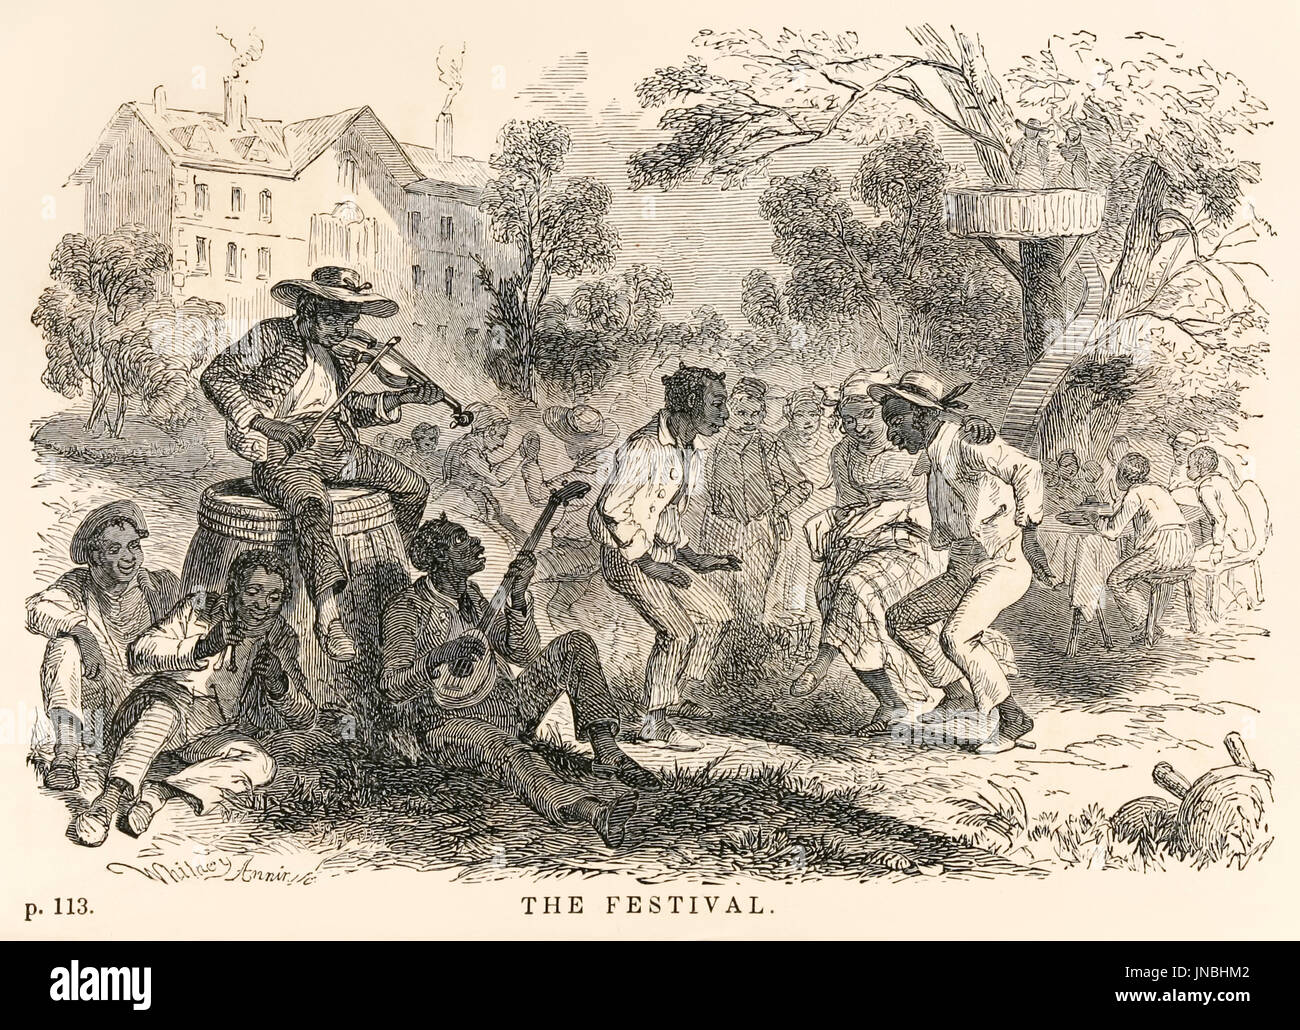 “The Festival” from ‘Uncle Tom’s Cabin Contrasted with Buckingham Hall’ by Robert Criswell in which Julia Tennyson, an abolitionist and writer from the North who has published pamphlets against the cruelty of slavery; falls in love with Colonel Buckingham a southern plantation owner and both enter into philosophical discussions regarding American slavery. Stock Photo